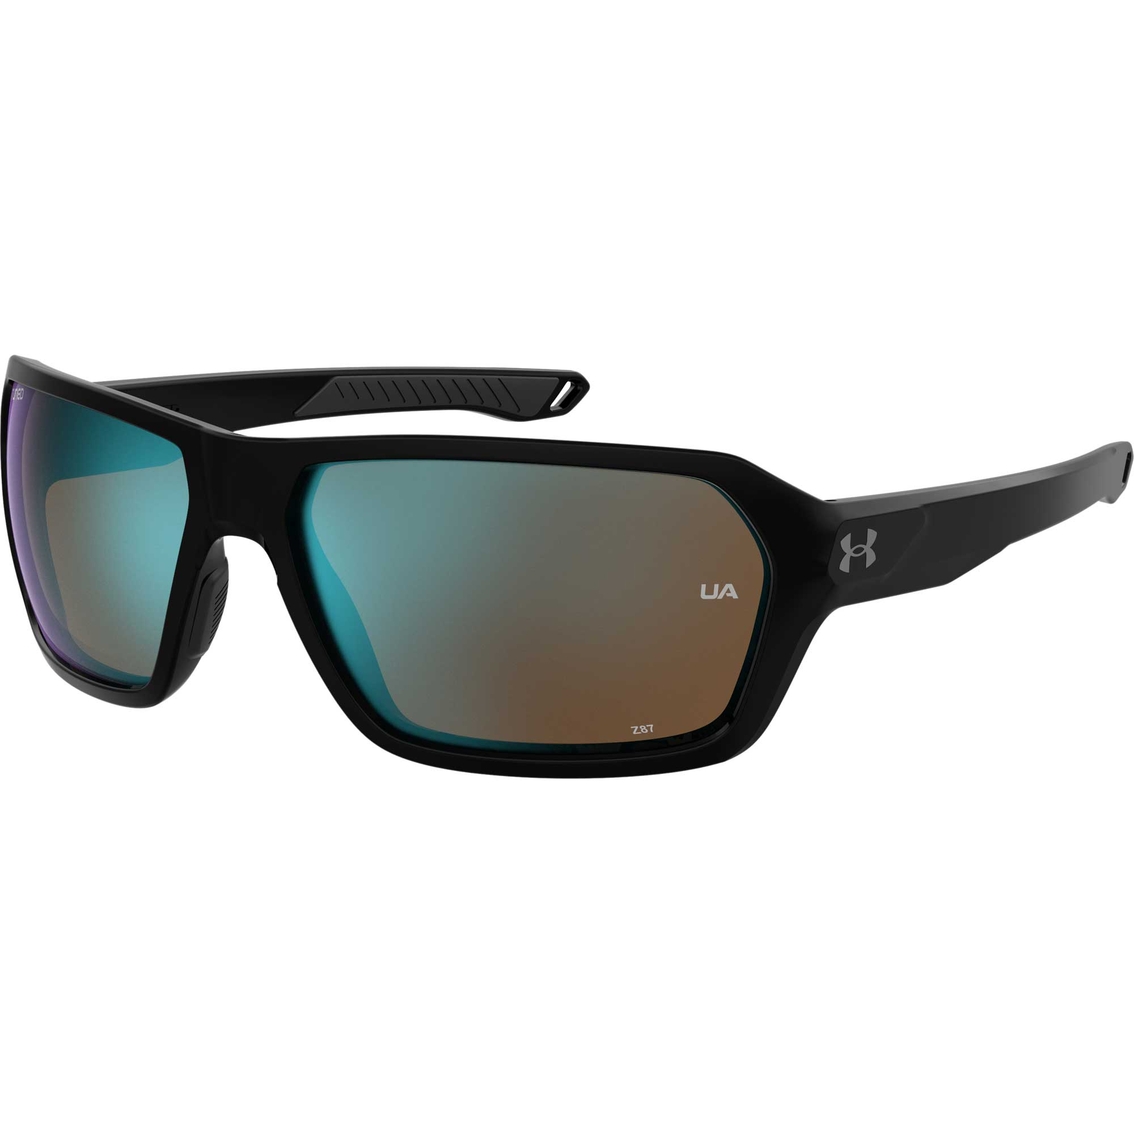 Under Armour Recon Sunglasses 0003KA - Image 1 of 3